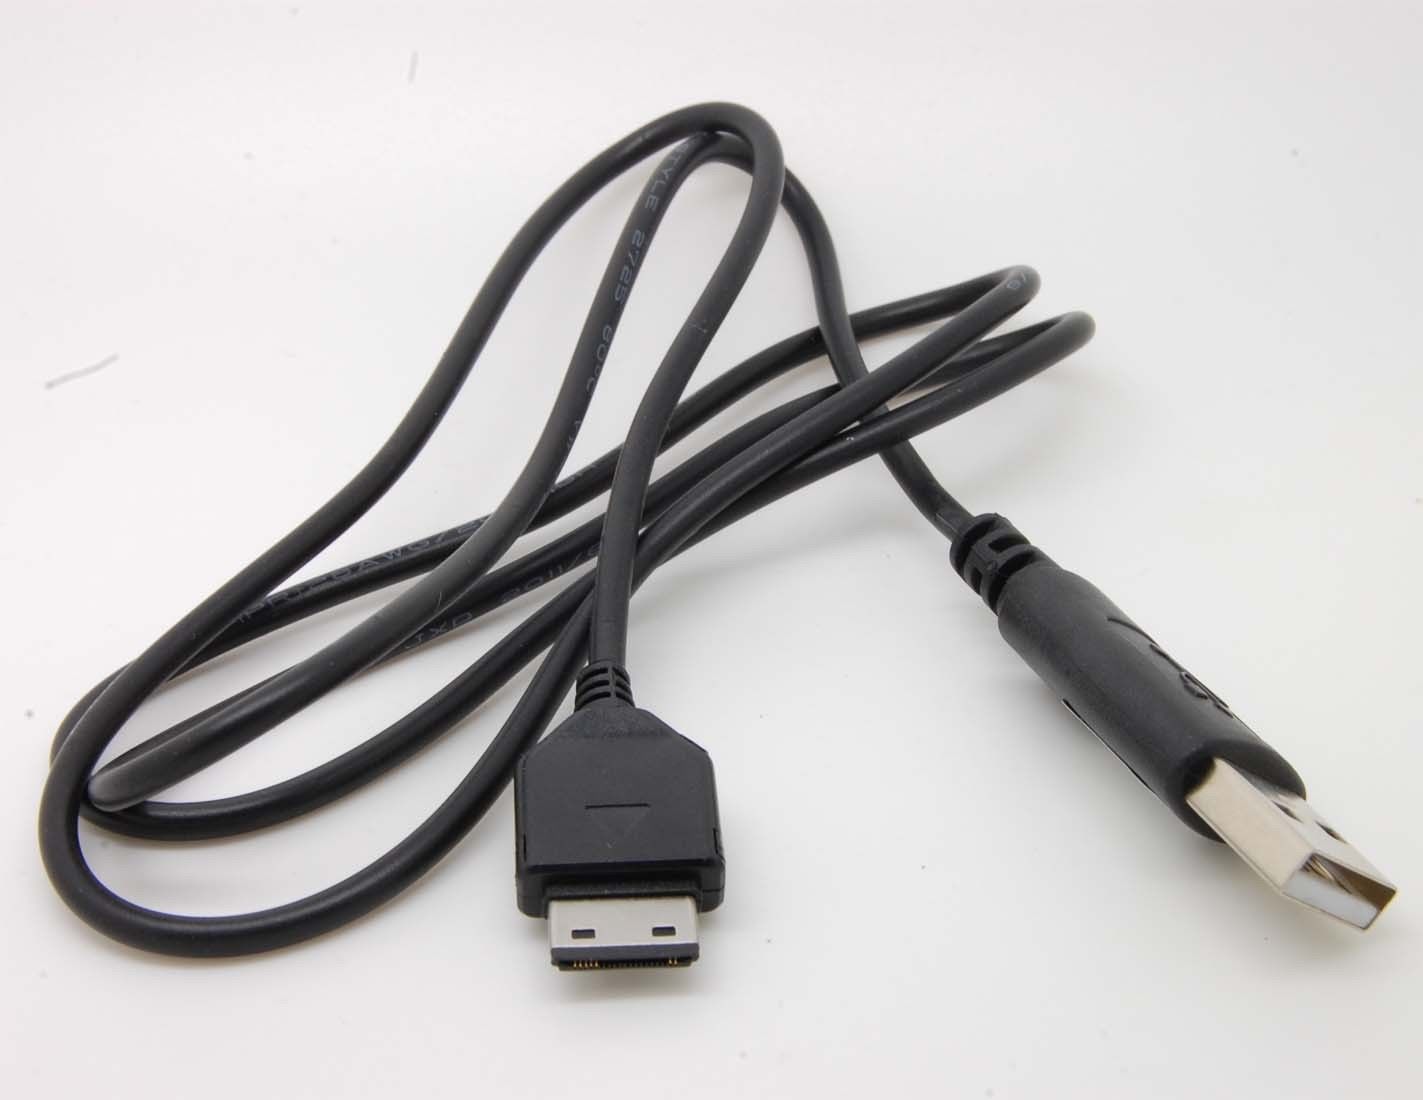 Usb Data &amp; Charger Cable Voor Samsung SGH-A877 A887 F200 F210 F400 F480 F490 F700 G600 G800 I450 I617 I627 i637 I640 I788 I900